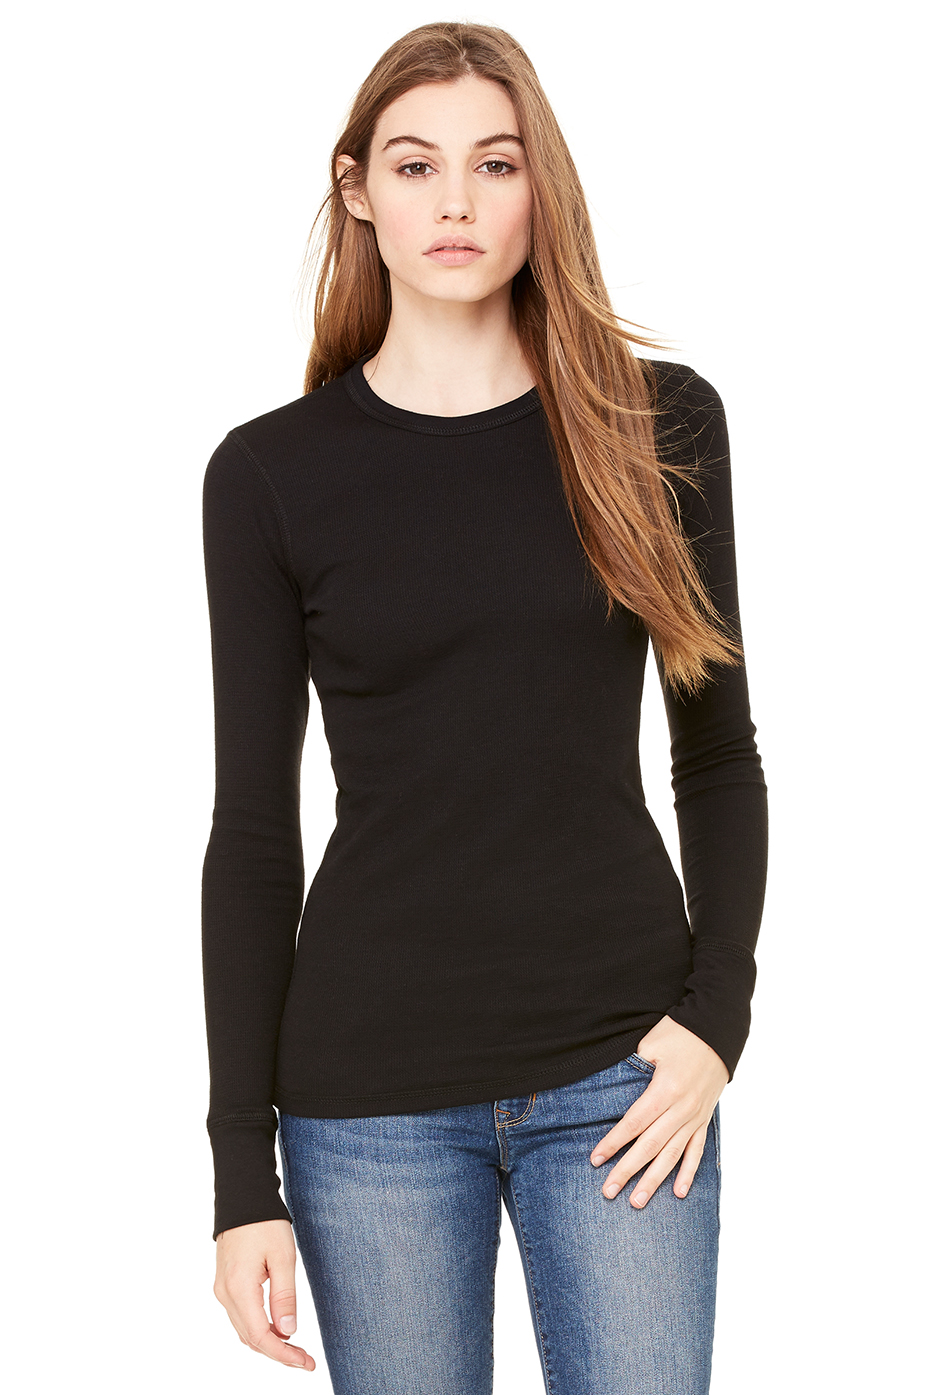 Wholesale Clothing | Women's Thermal L/S Tee